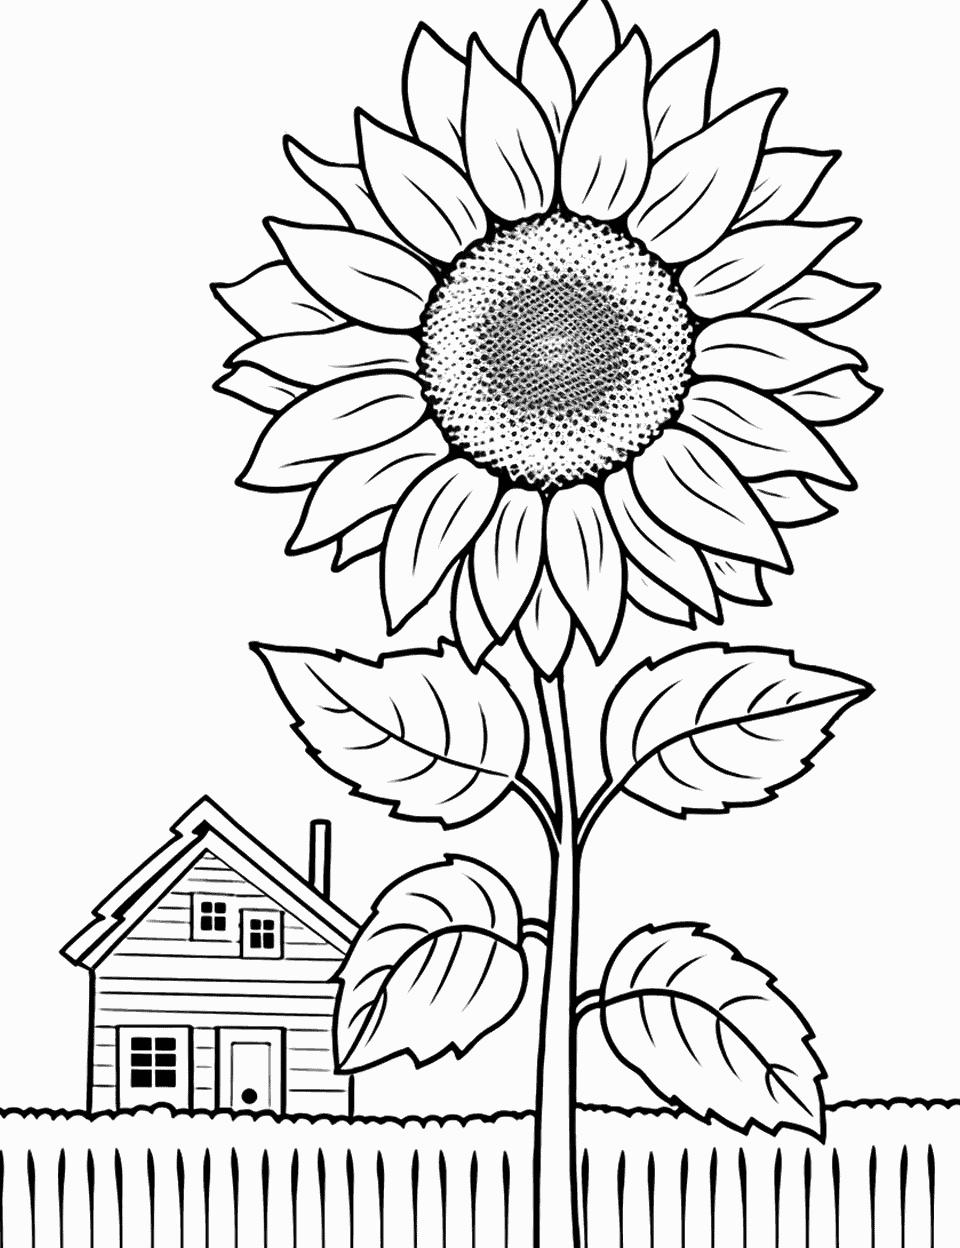 Sunflower and Farmhouse Coloring Page - A sunflower with a farmhouse in the distance.